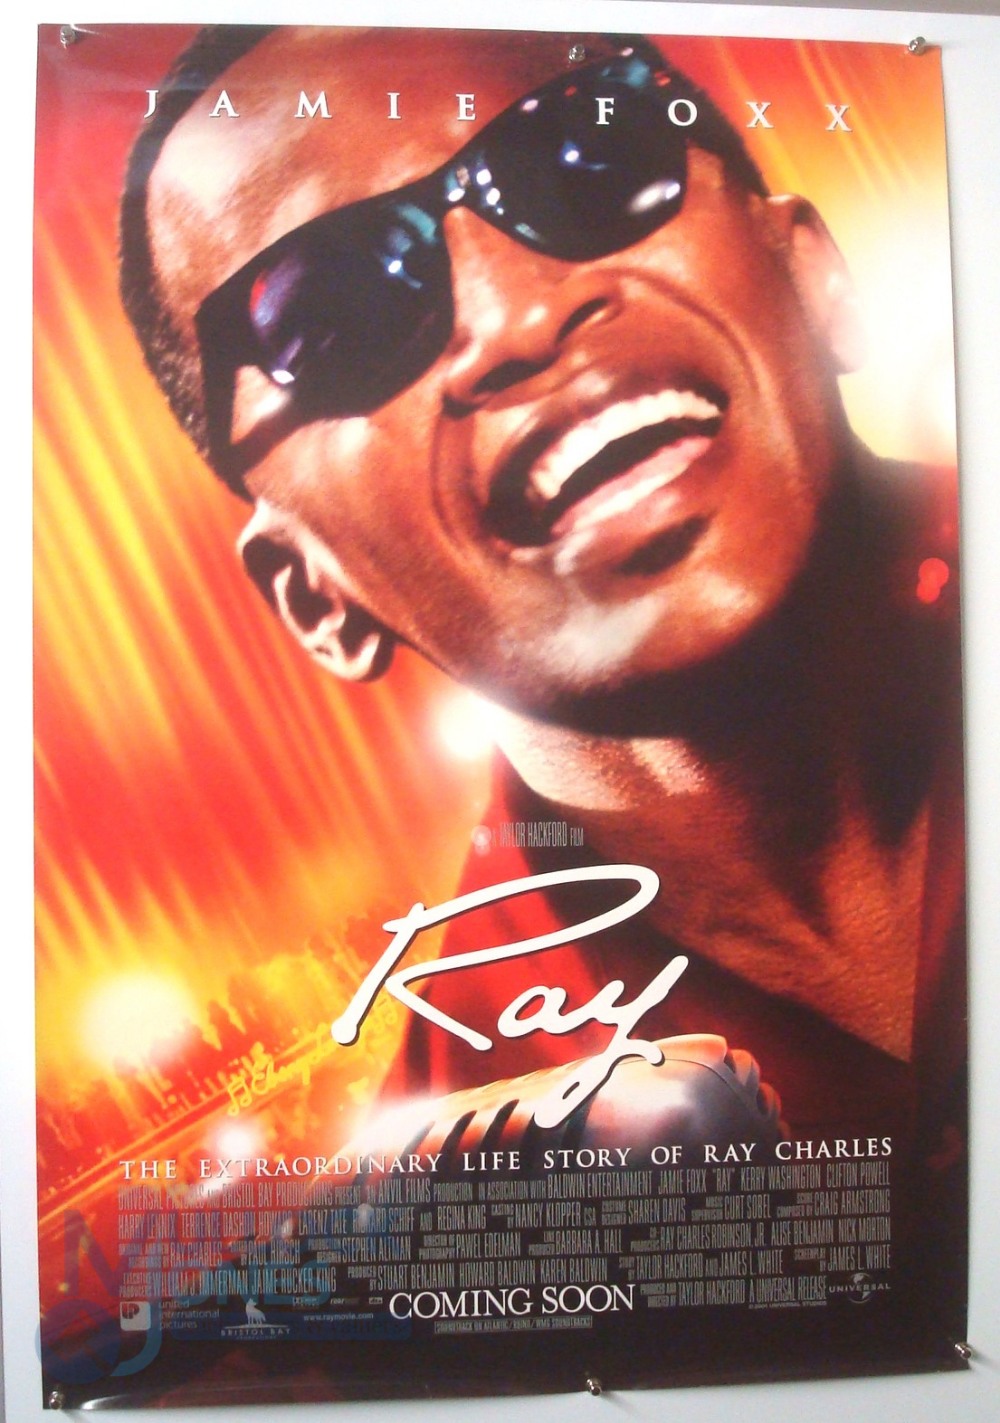 Original Movie/Film Poster - 2004 Ray (Ray Charles) - 40x30" approx. kept rolled, creases - Image 2 of 2